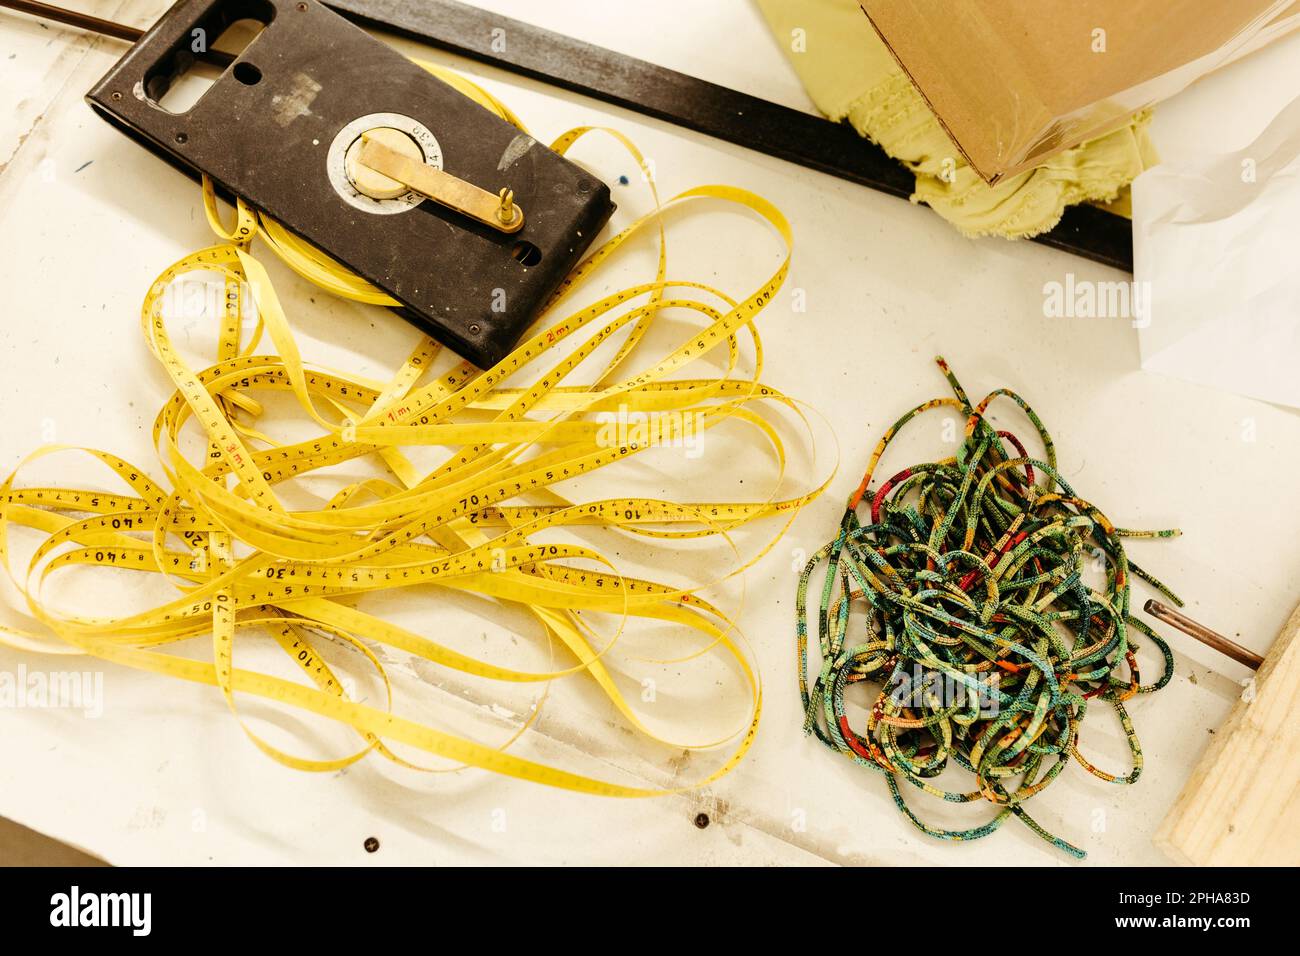 A closeup shot of a yellow measuring tape laying atop a vibrant multi-colored rope, providing a great contrast to the pastel color scheme Stock Photo